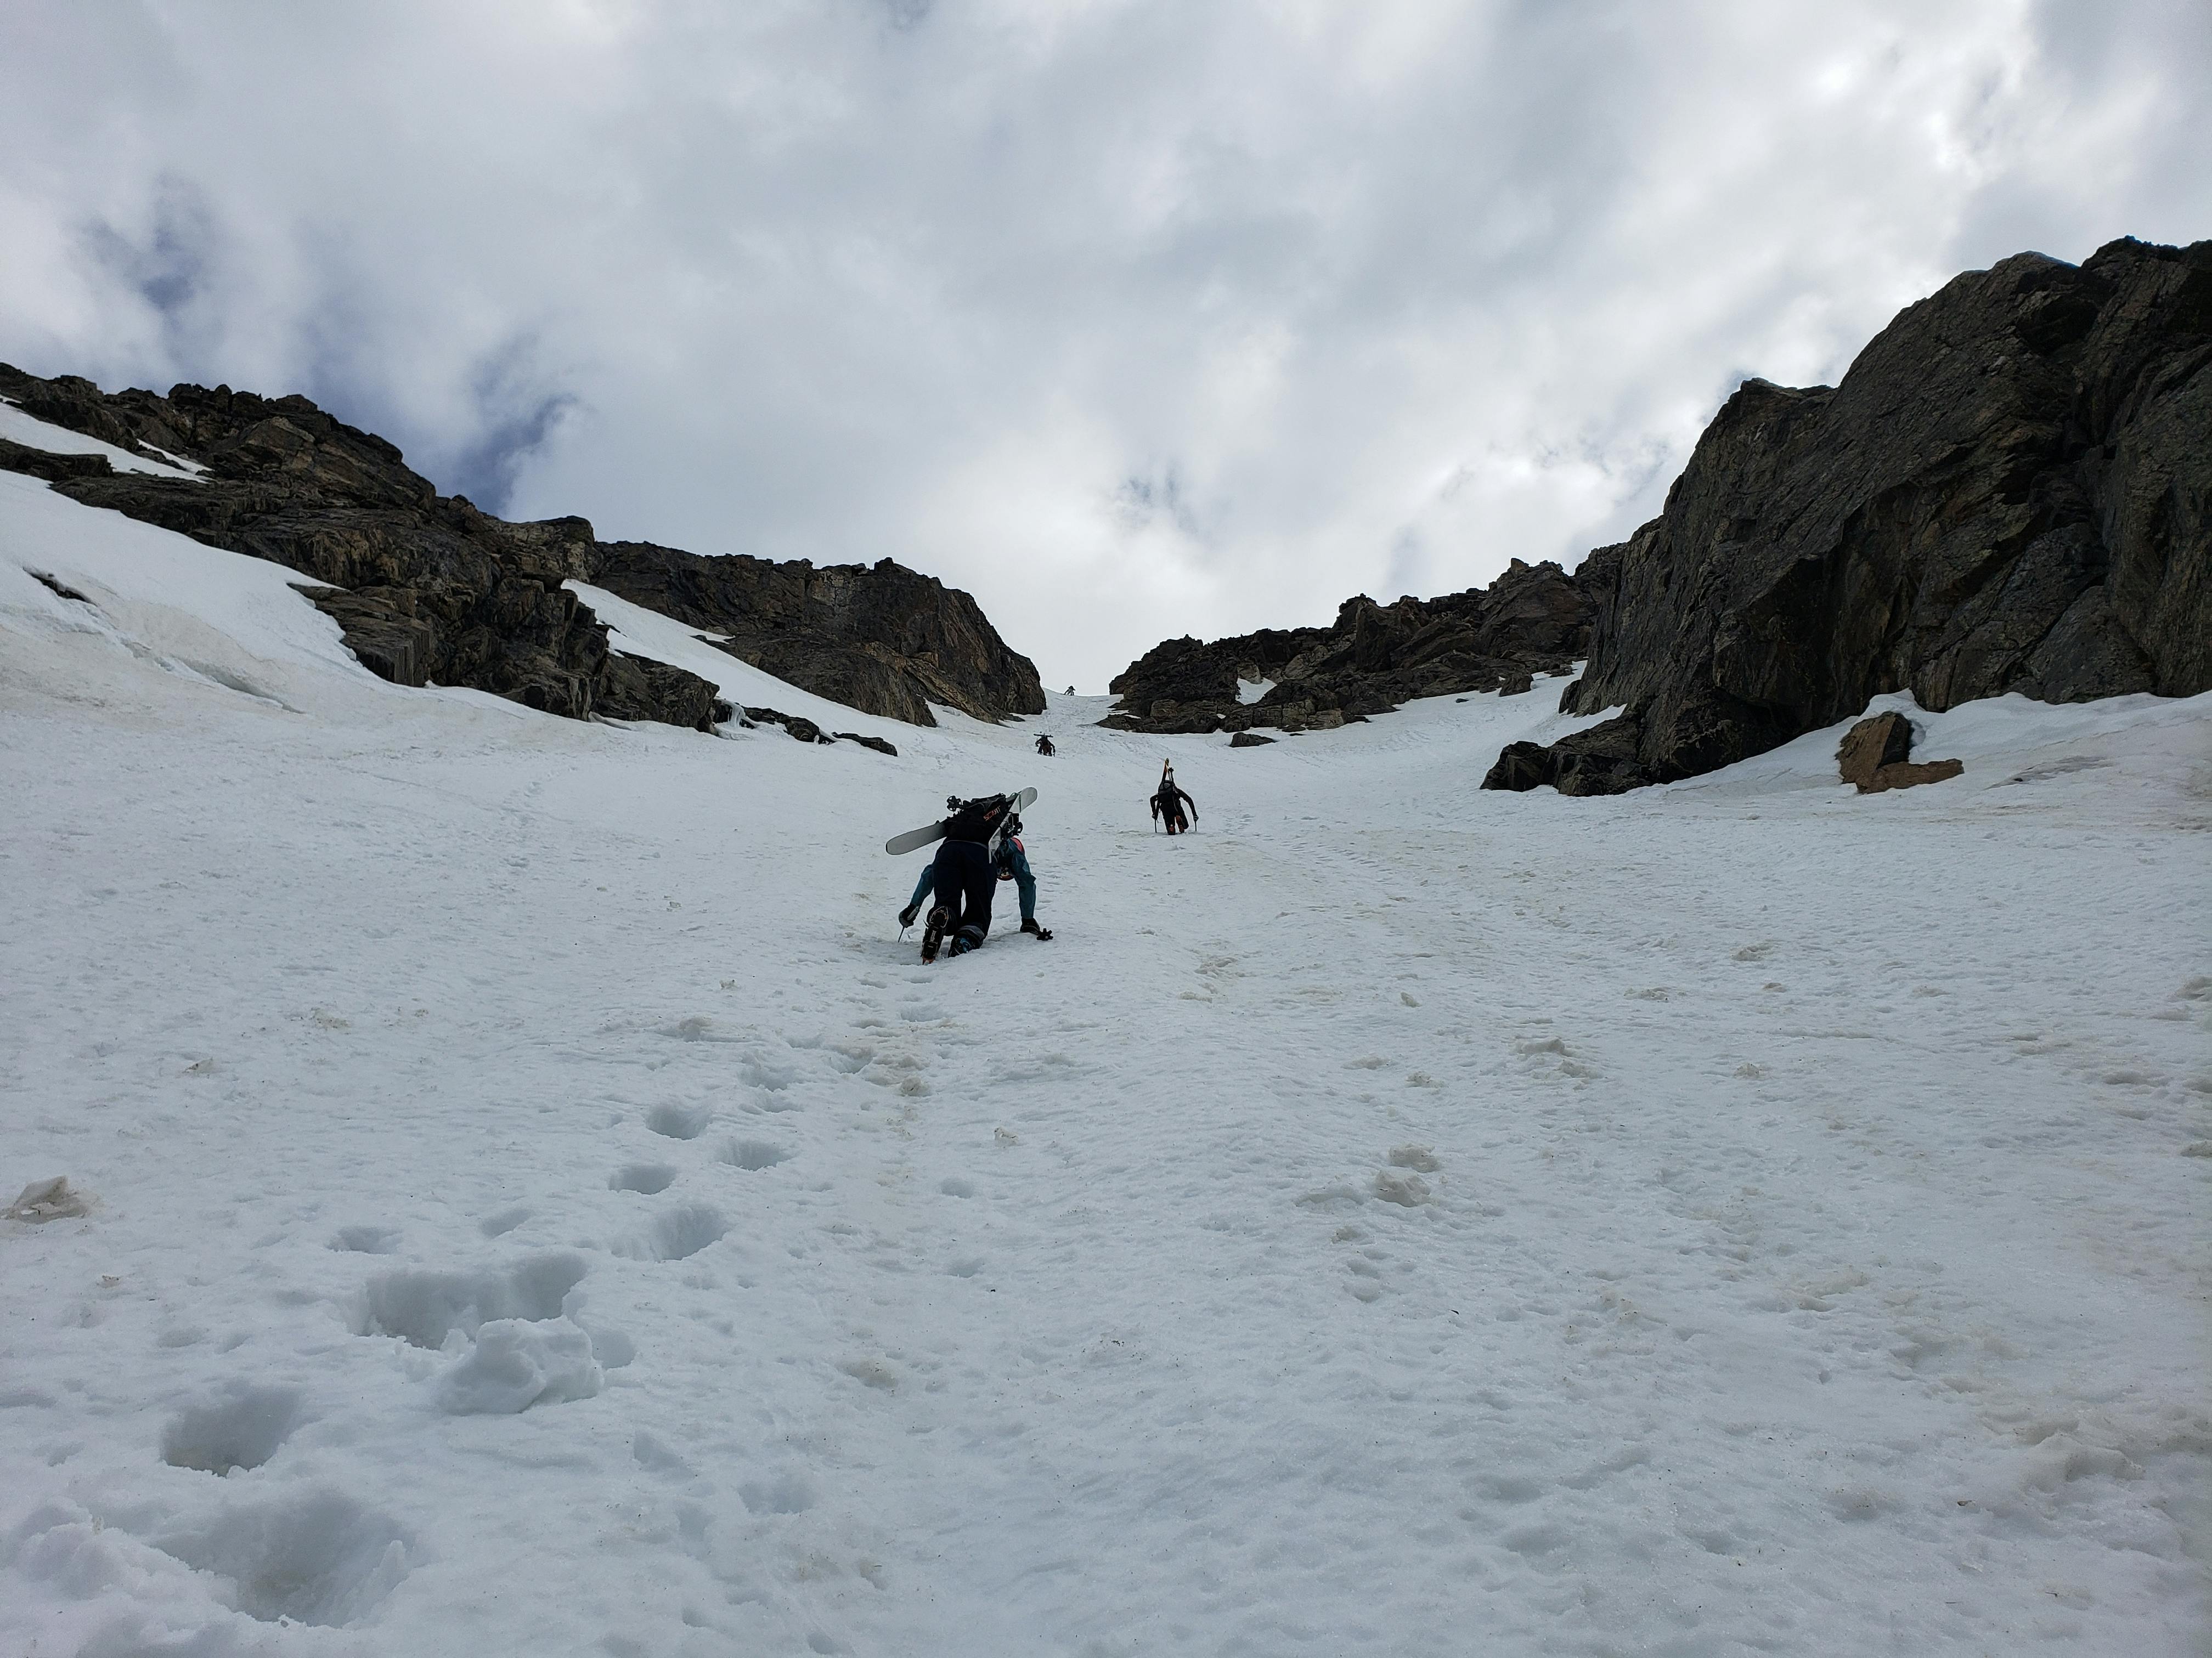 People climb up a snowy mountain